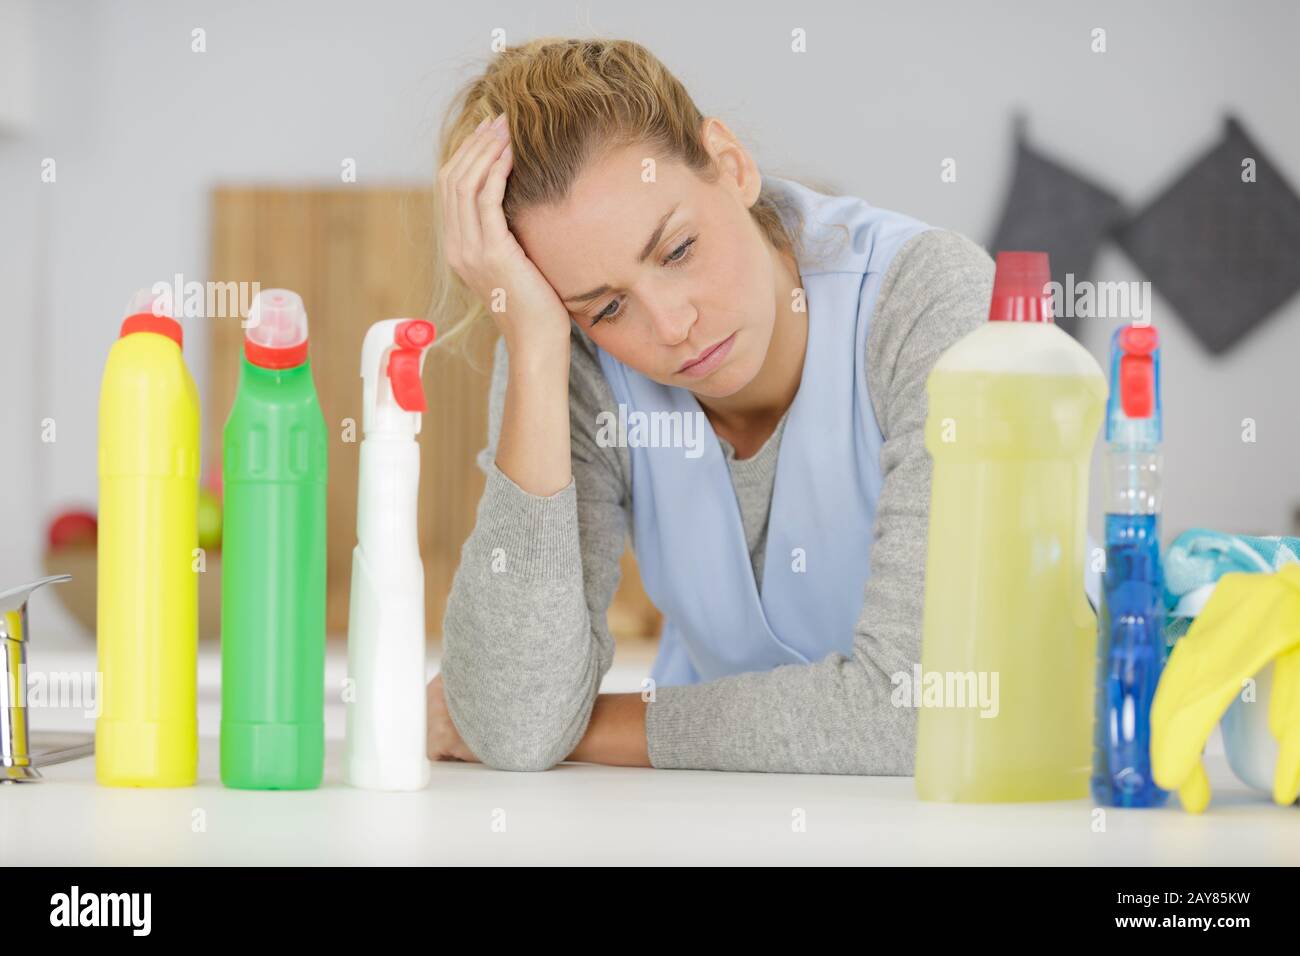 studio shot of middle aged woman holding cleaning products Stock Photo